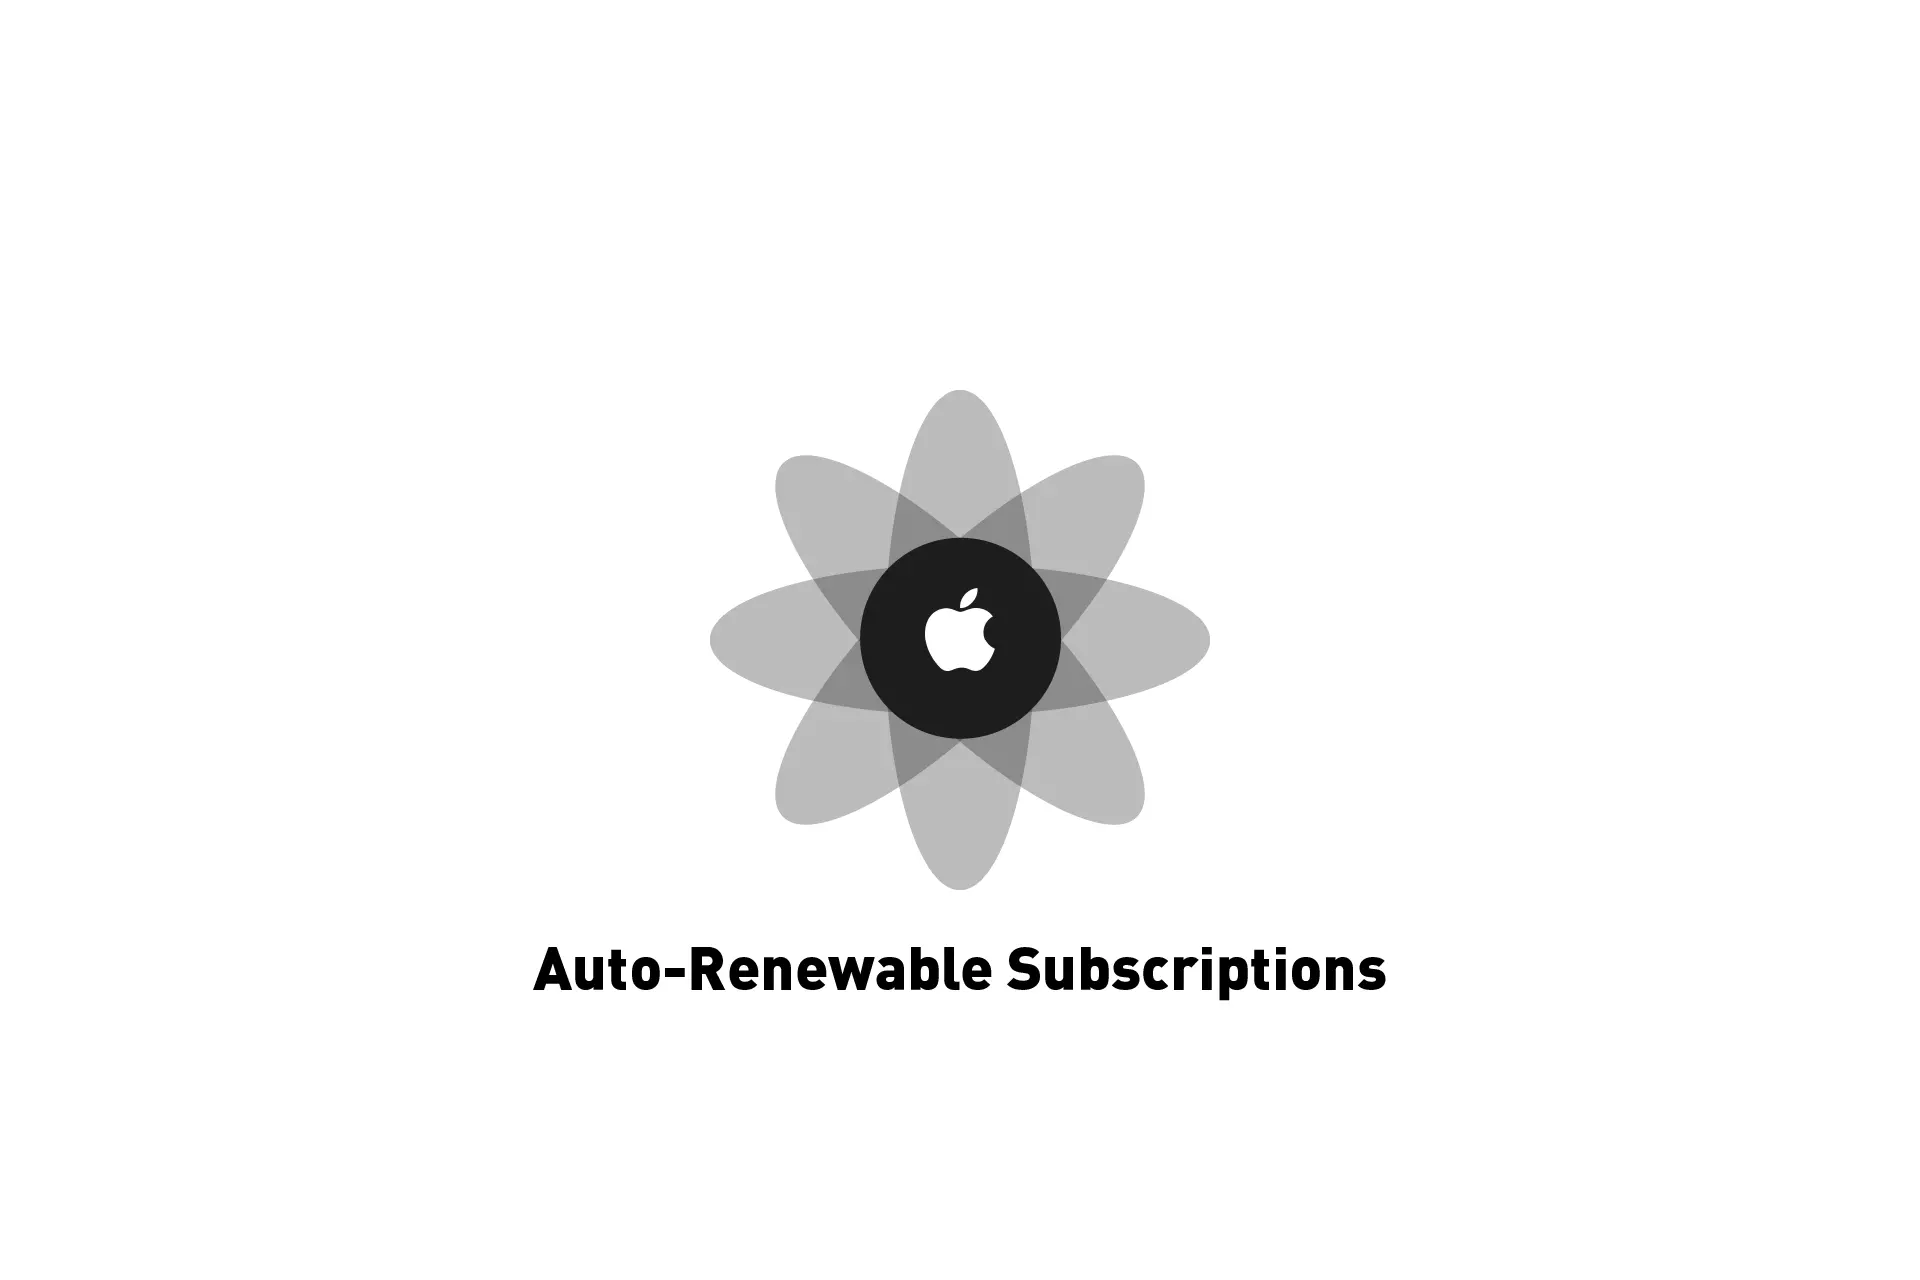 A flower that represents Apple with the text "Auto-Renewable Subscriptions" beneath it.